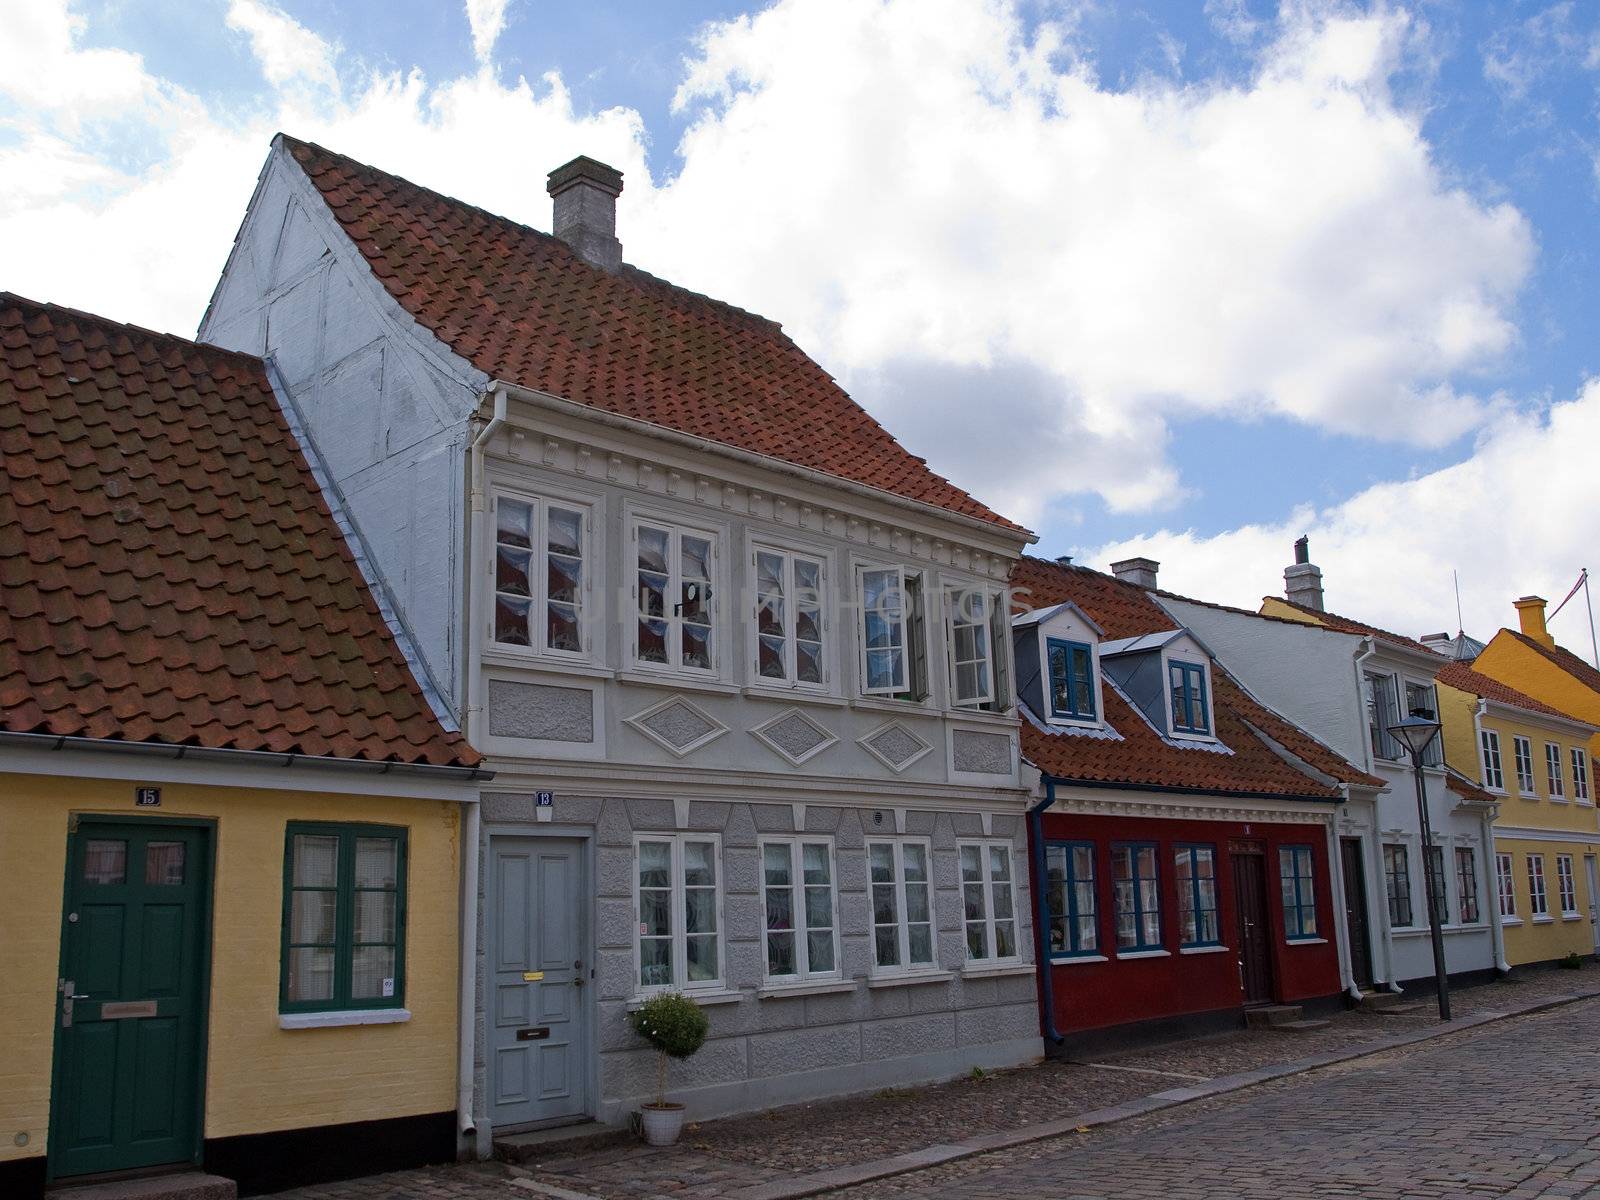 Traditional typical classic old style  danish city houses in Odense Denmark